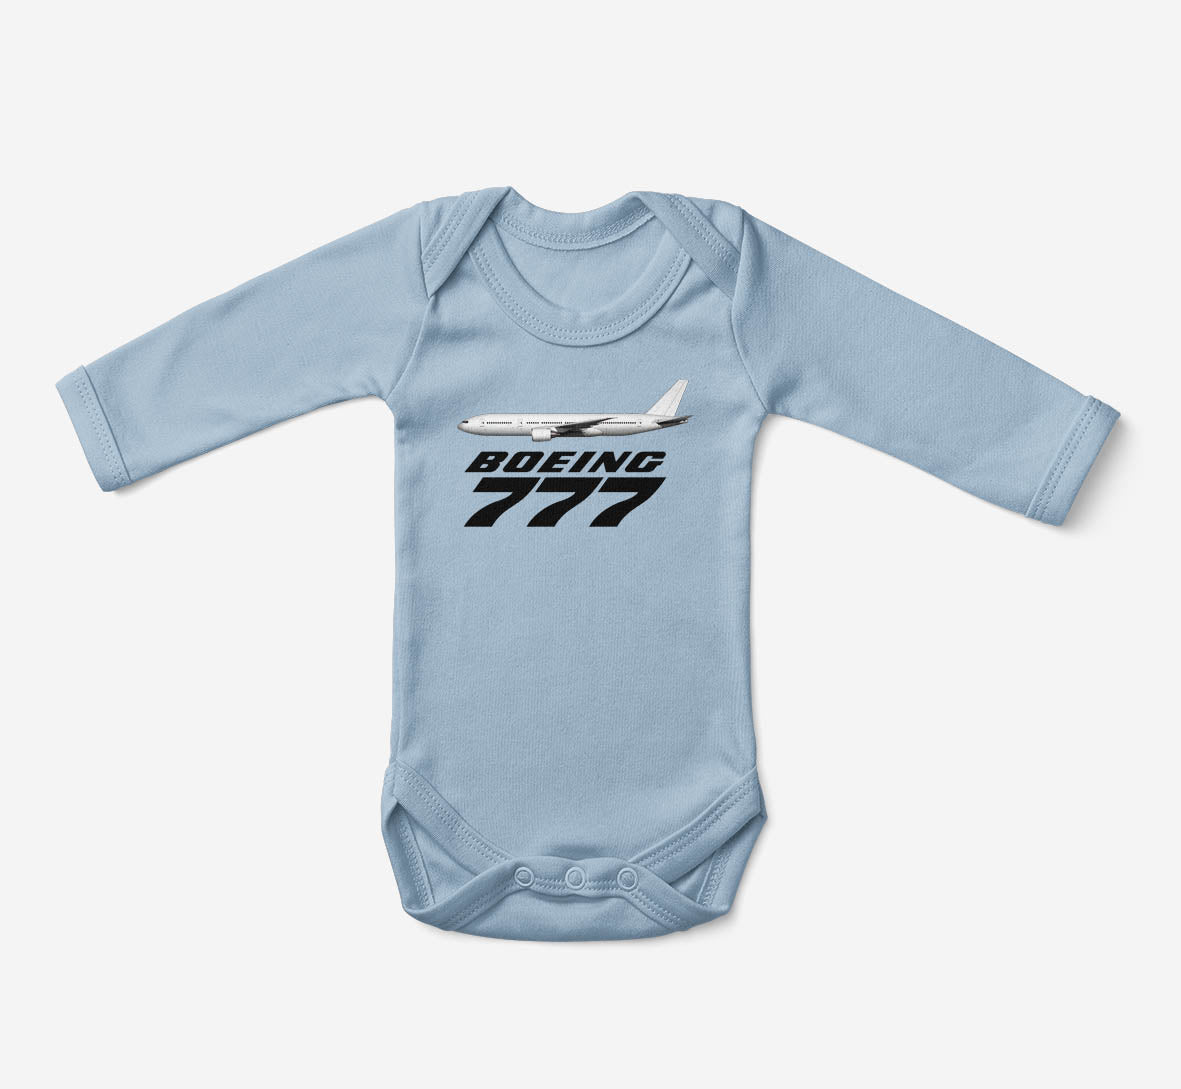 The Boeing 777 Designed Baby Bodysuits